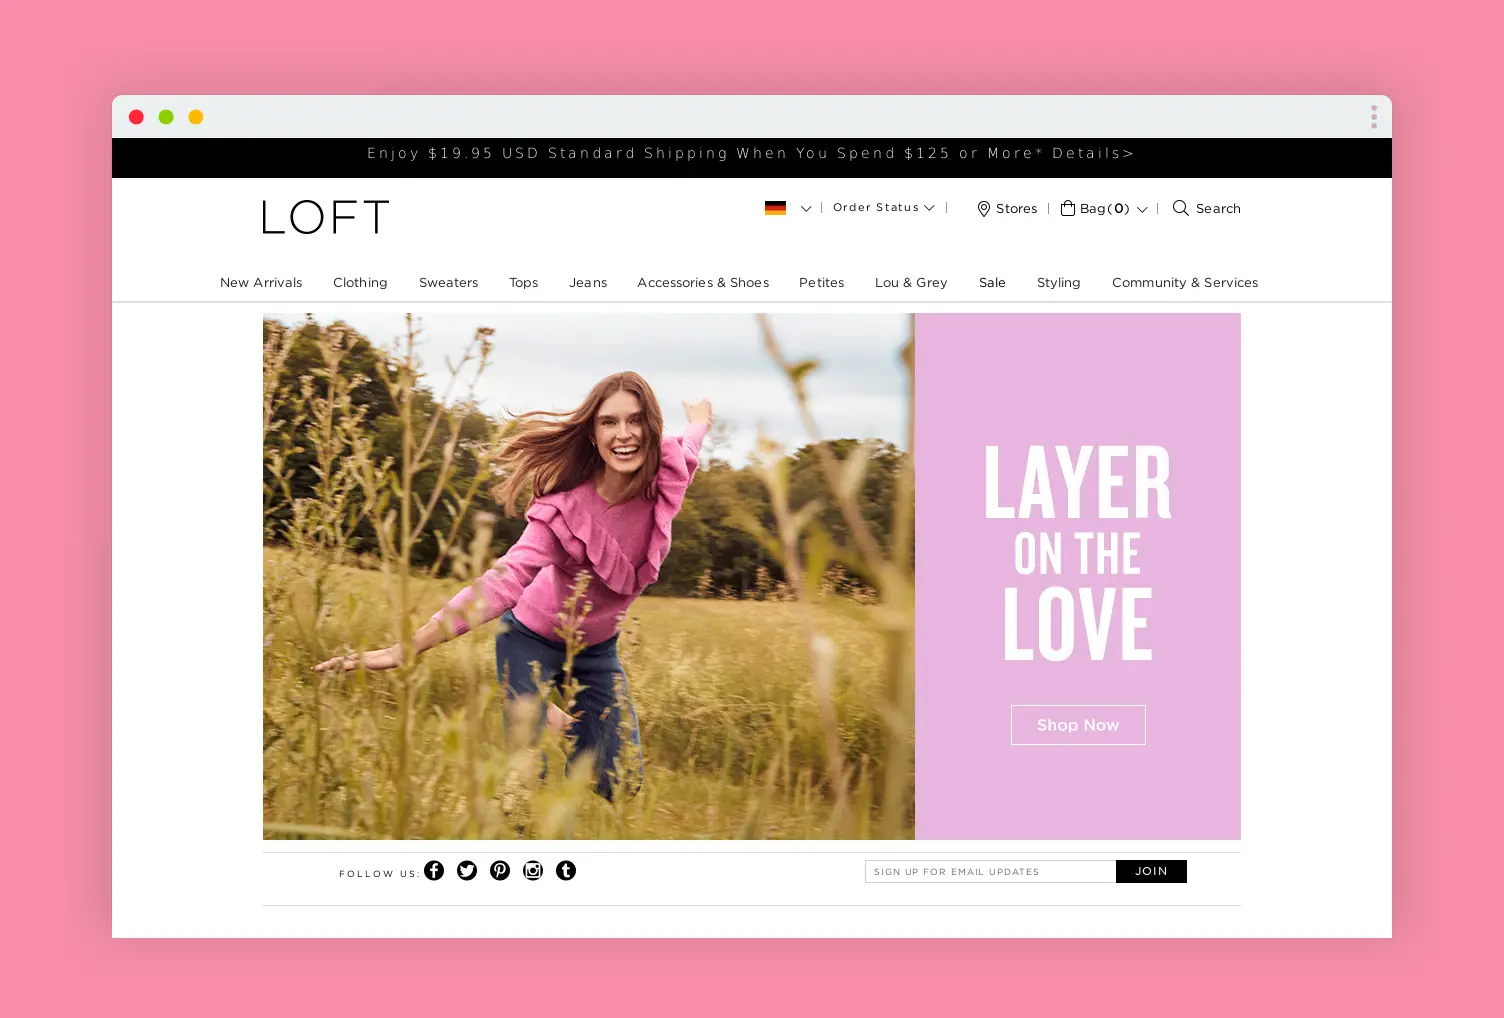 Student using browser to shop LOFT